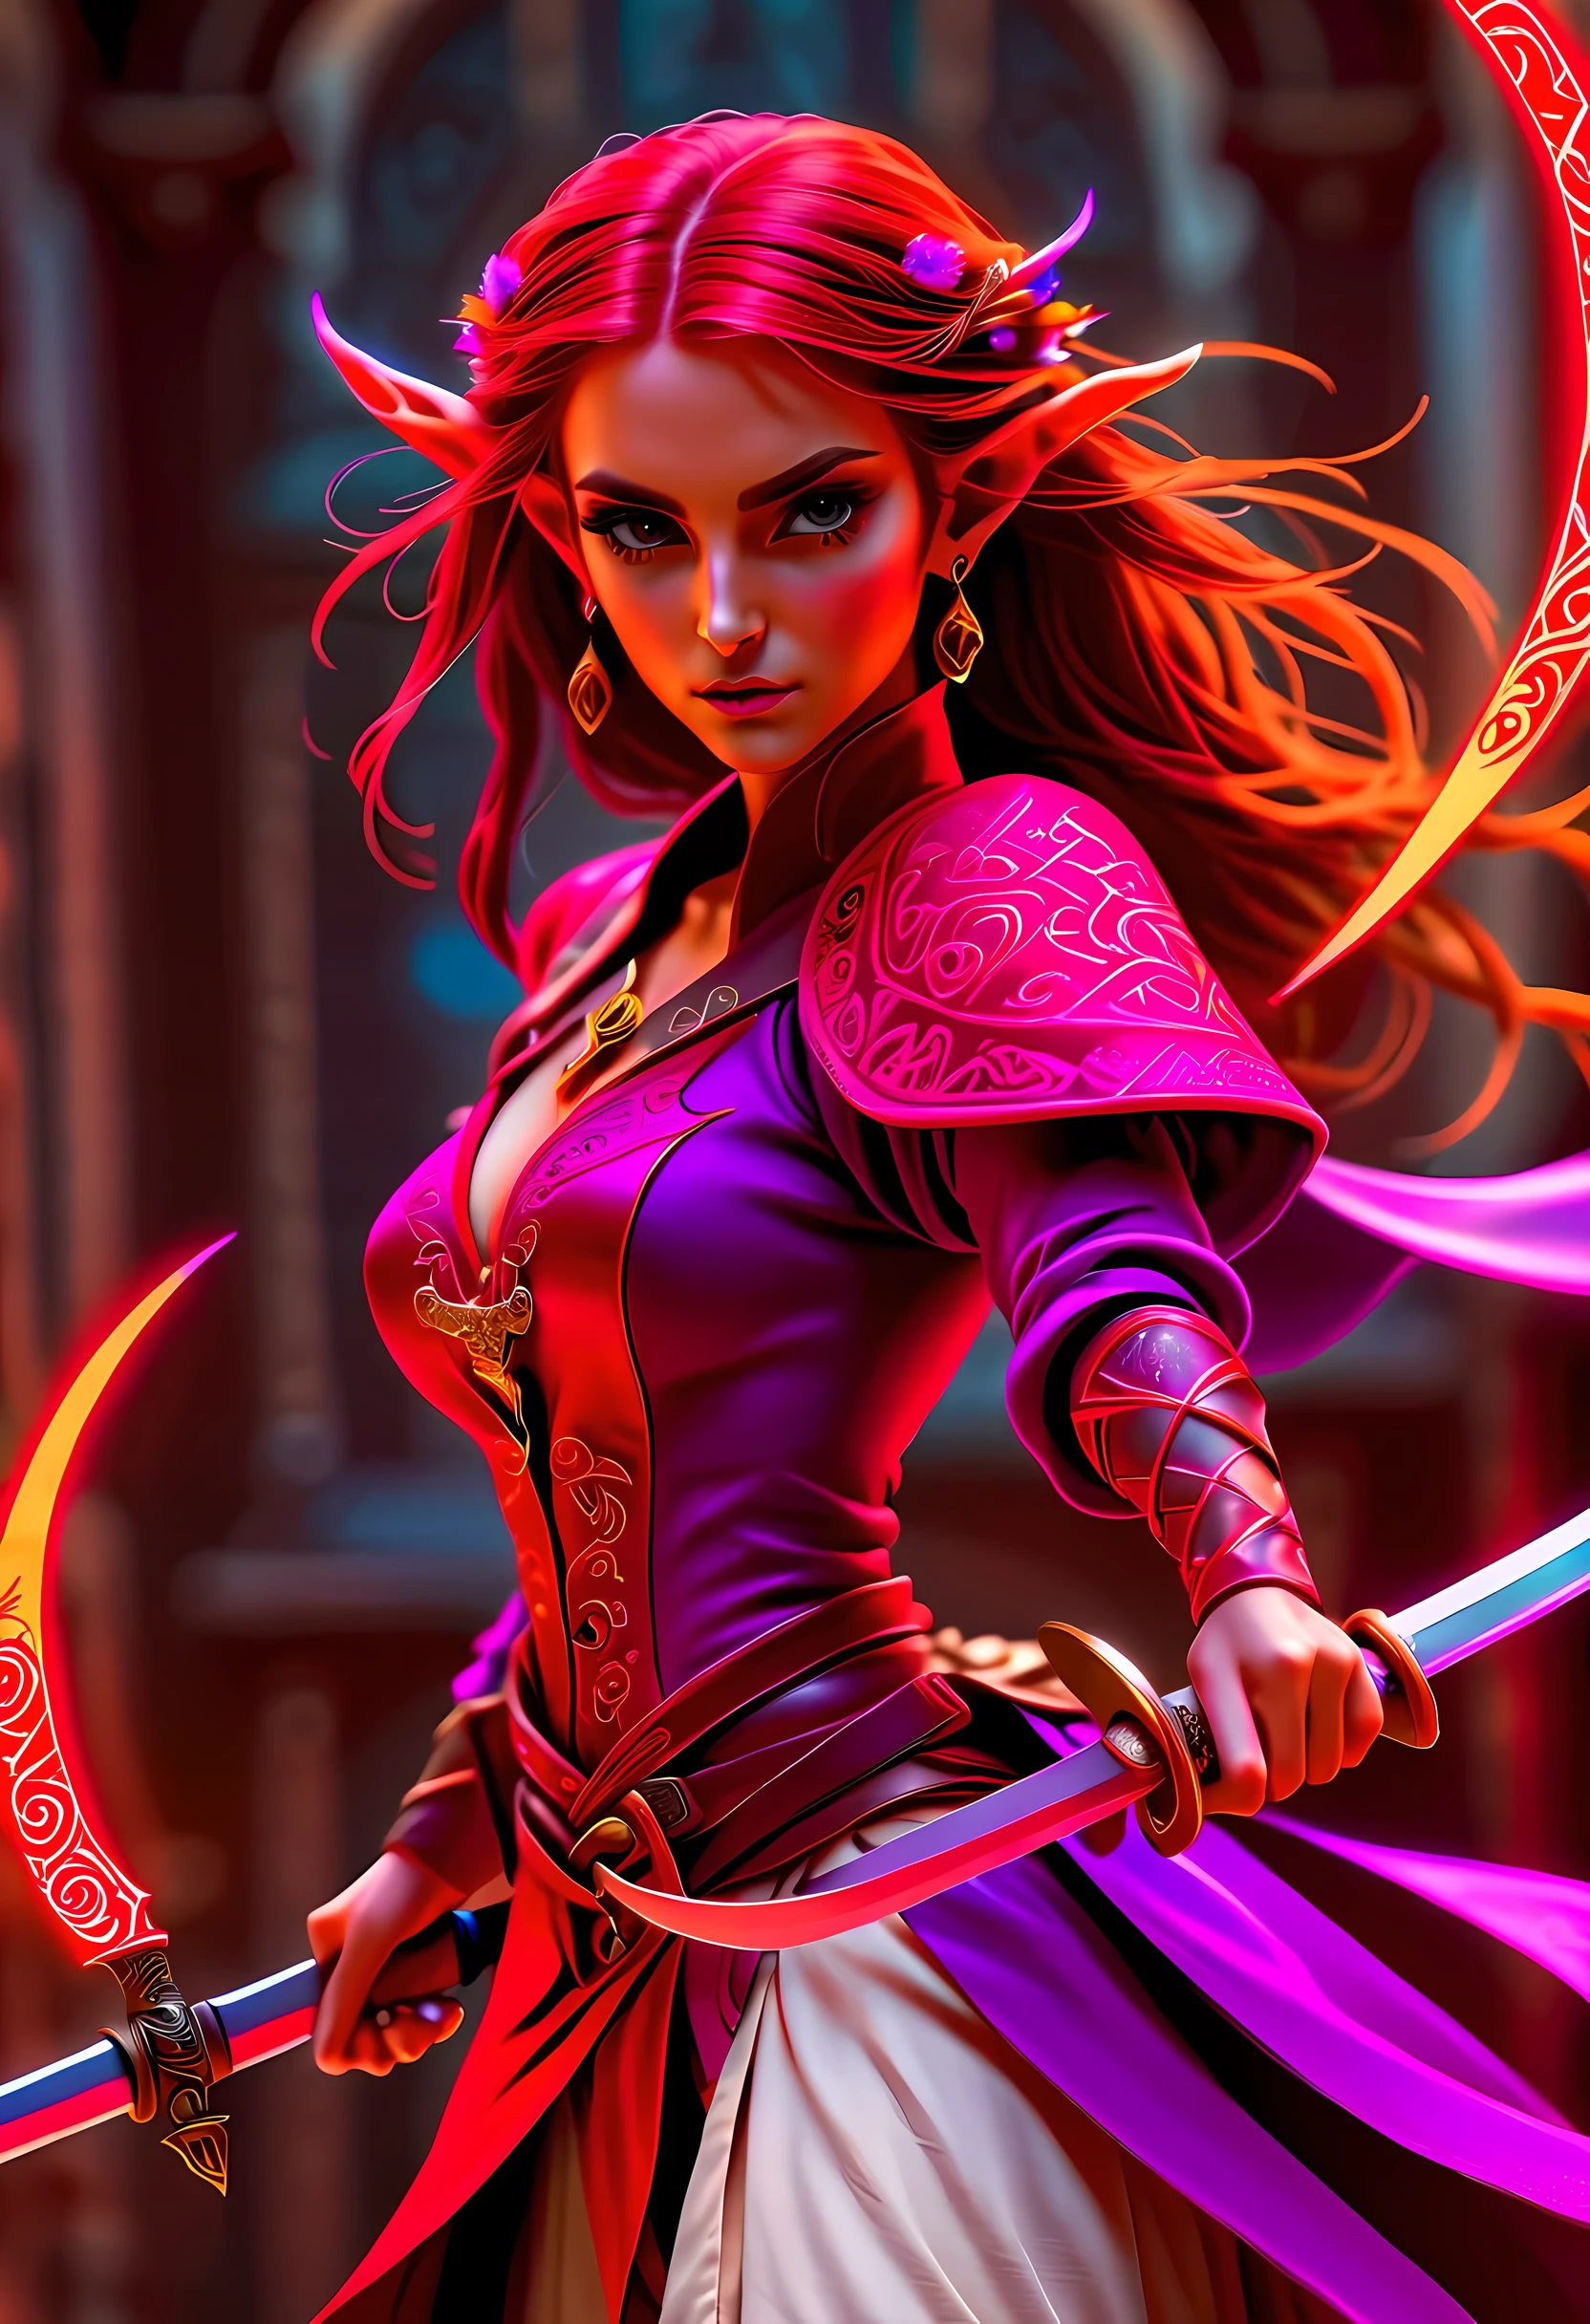 a picture of a female elf (intense details, Masterpiece, best quality: 1.5) fantasy swashbuckler, fantasy fencer, armed with a slim sword, shinning sword, metallic shine, colorful clothes, dynamic clothing, an ultra wide shot, full body (intense details, Masterpiece, best quality: 1.5)epic beautiful female elf (intense details, Masterpiece, best quality: 1.5), rich hair, braided hair, small pointed ears, action shot, GlowingRunesAI_red  [colorful magical sigils in the air],[ colorful arcane markings floating] (intricate details, Masterpiece, best quality: 1.6), holding a [sword] (intricate details, Masterpiece, best quality: 1.6) holding a [sword glowing in red light]fantasy urban street (intense details, Masterpiece, best quality: 1.5),  purple cloak, long cloak (intense details, Masterpiece, best quality: 1.5), sense of daring, sense of adventure,  high details, best quality, 8k, [ultra detailed], masterpiece, best quality, (extremely detailed), dynamic angle, ultra wide shot, photorealistic, RAW, fantasy art, dnd art,fantasy art, realistic art,